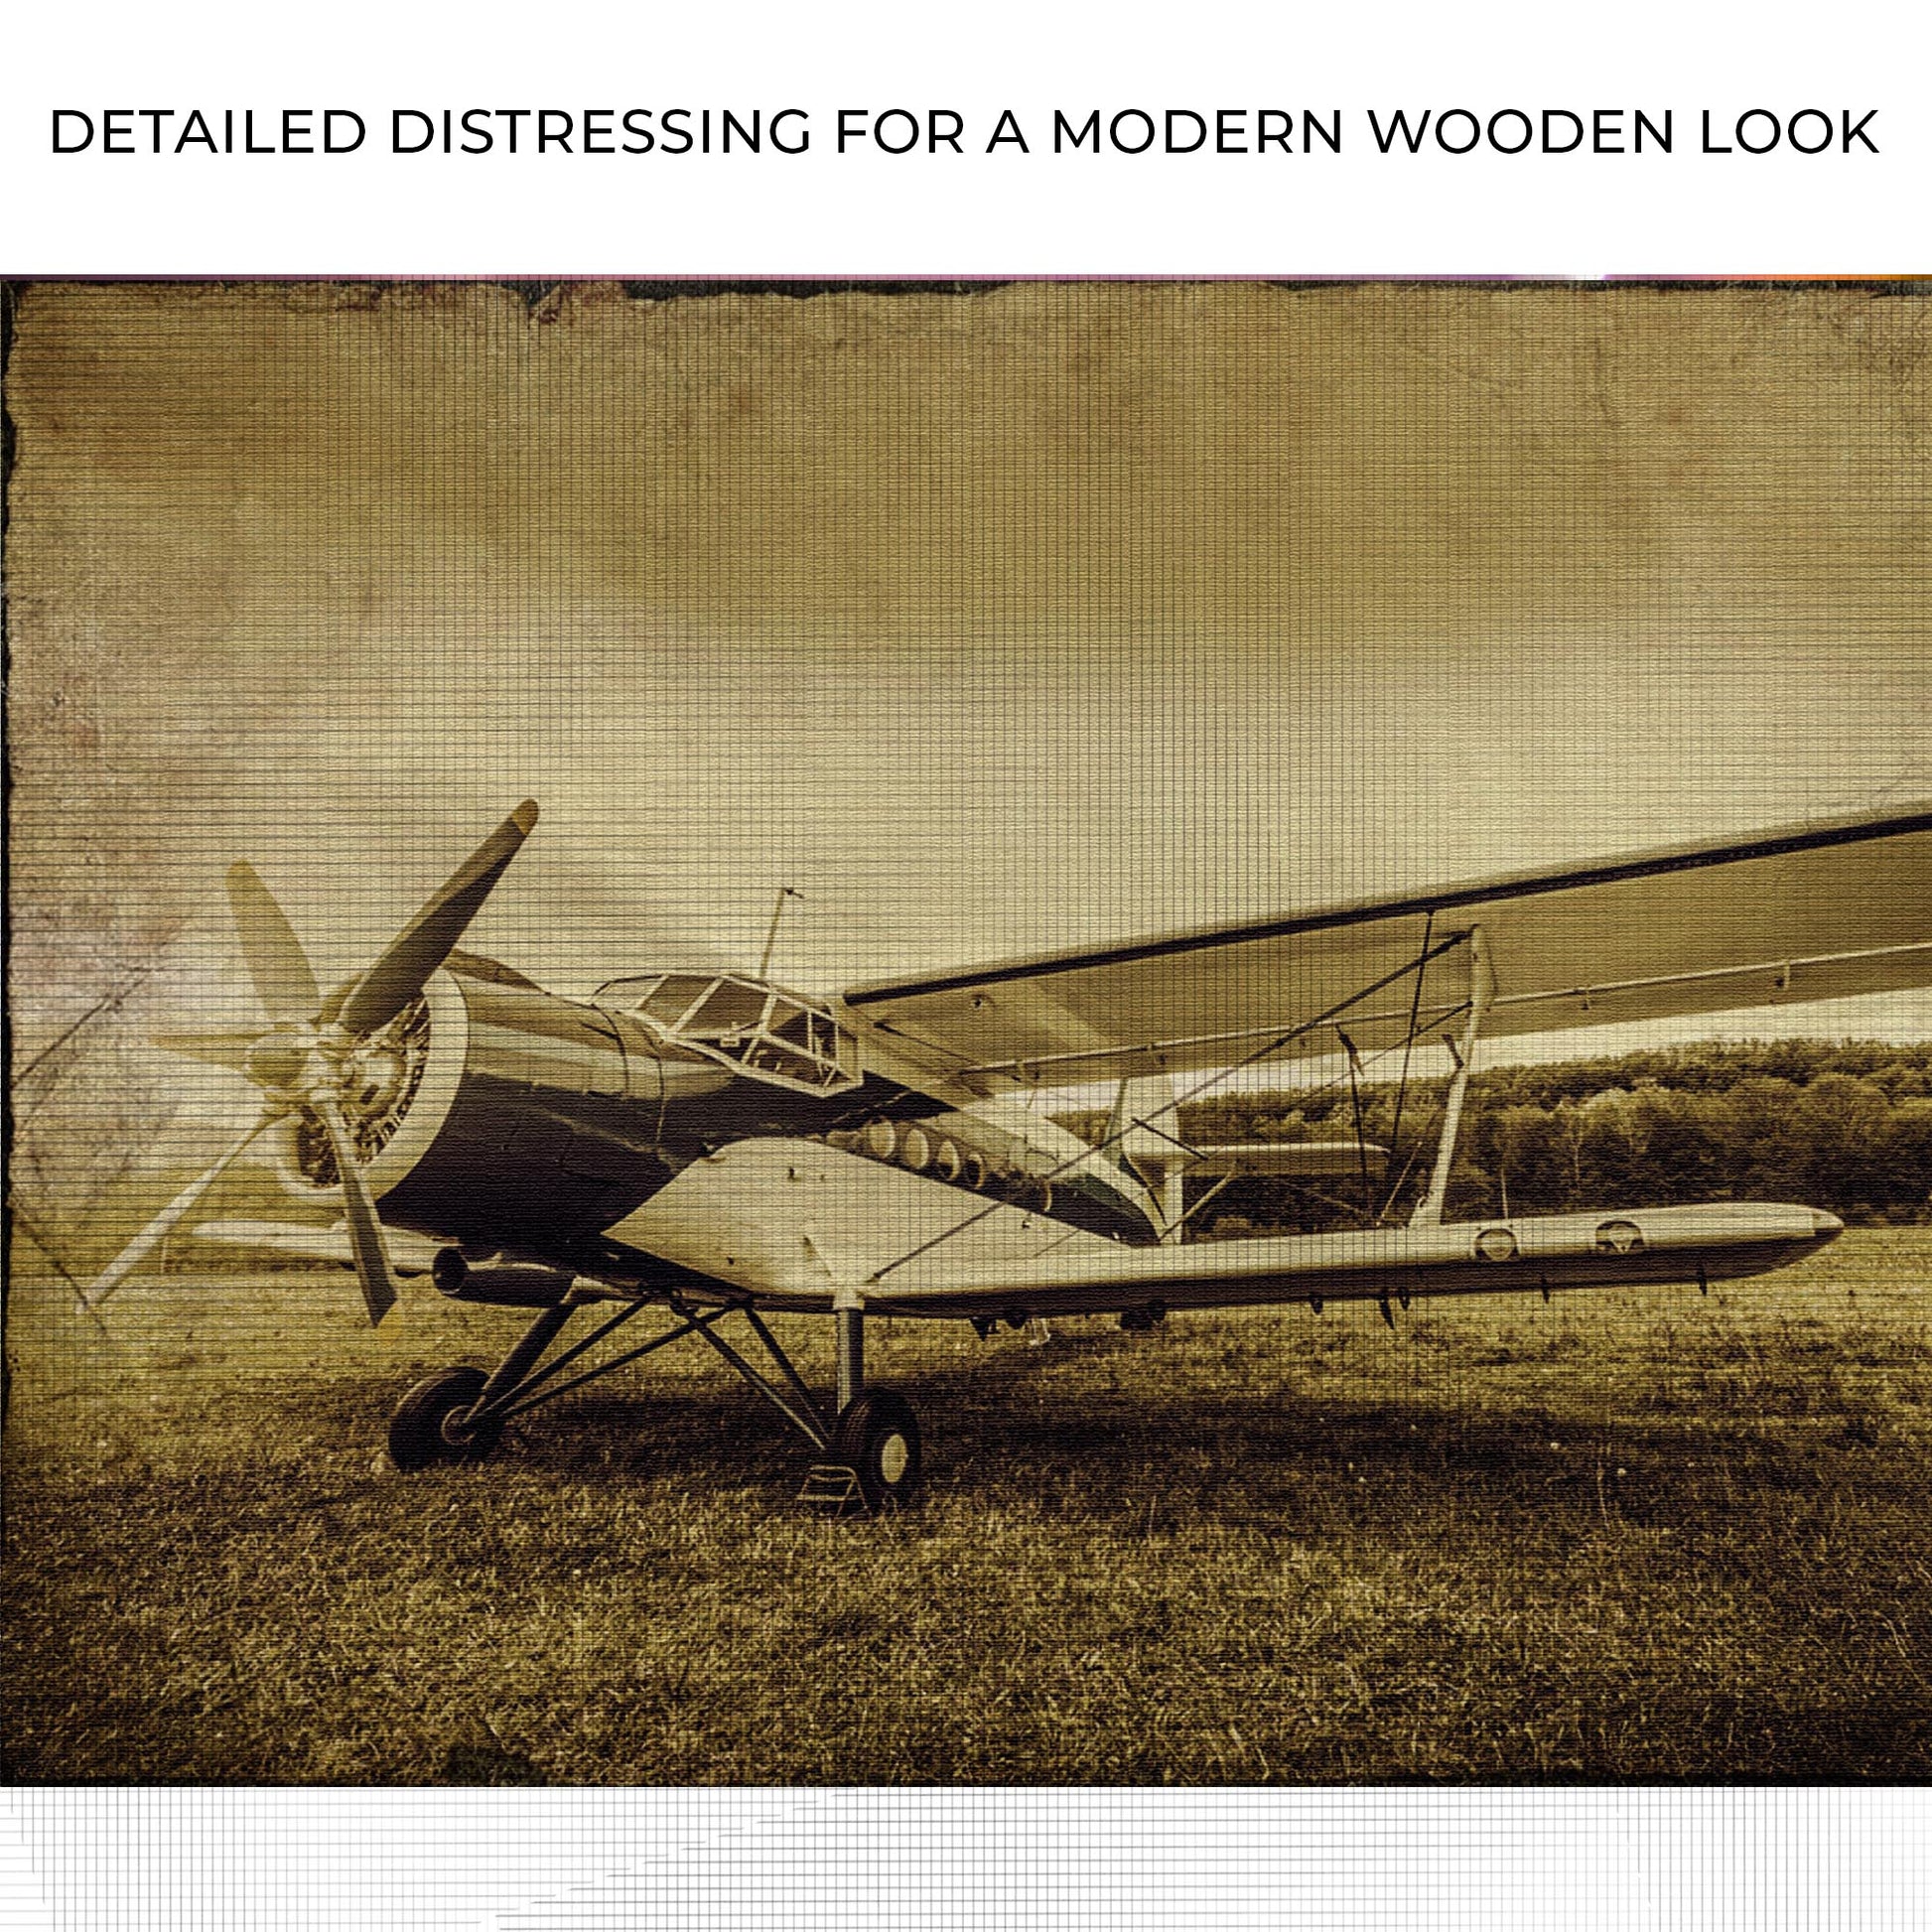 Vintage Airplane Grunge Canvas Wall Art Zoom - Image by Tailored Canvases